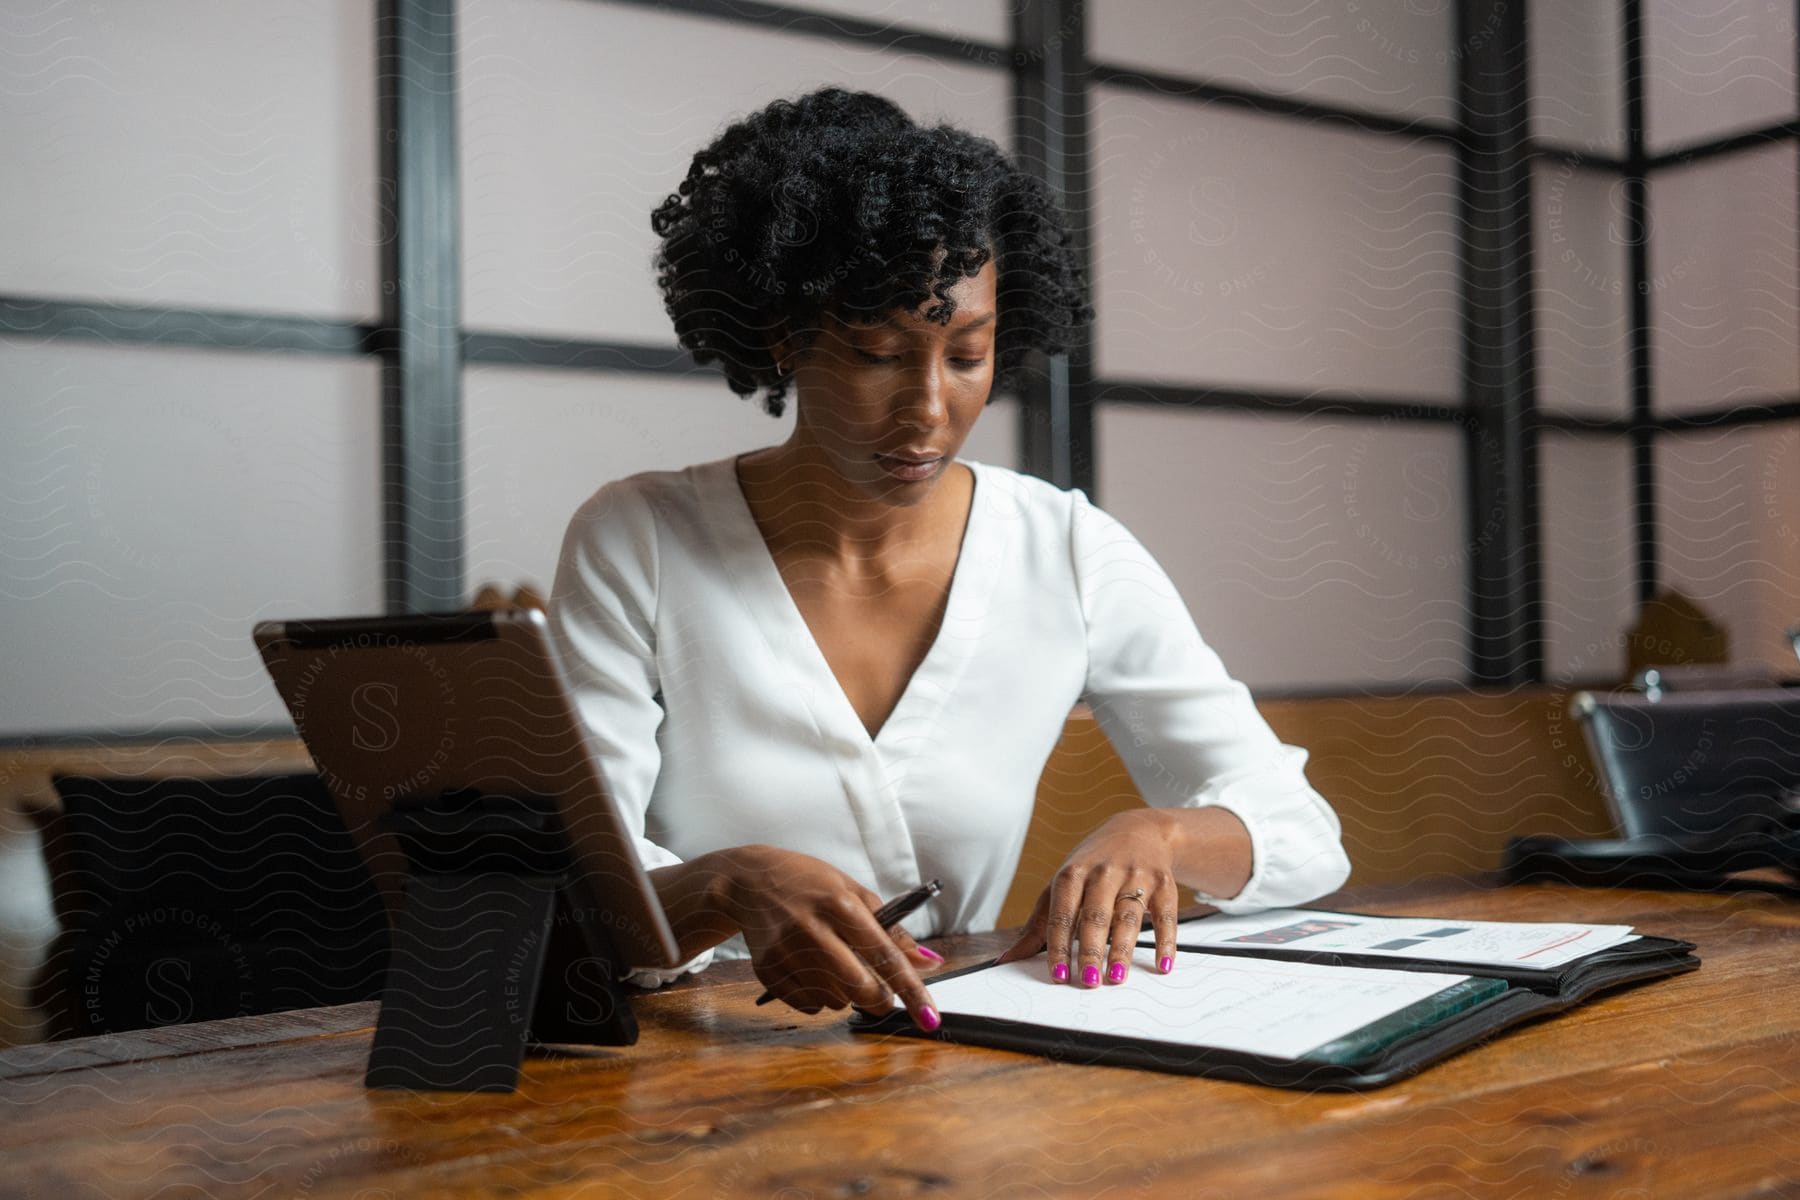 A businesswoman with curly hair and a white shirt sits at a desk next to a tablet in the office.